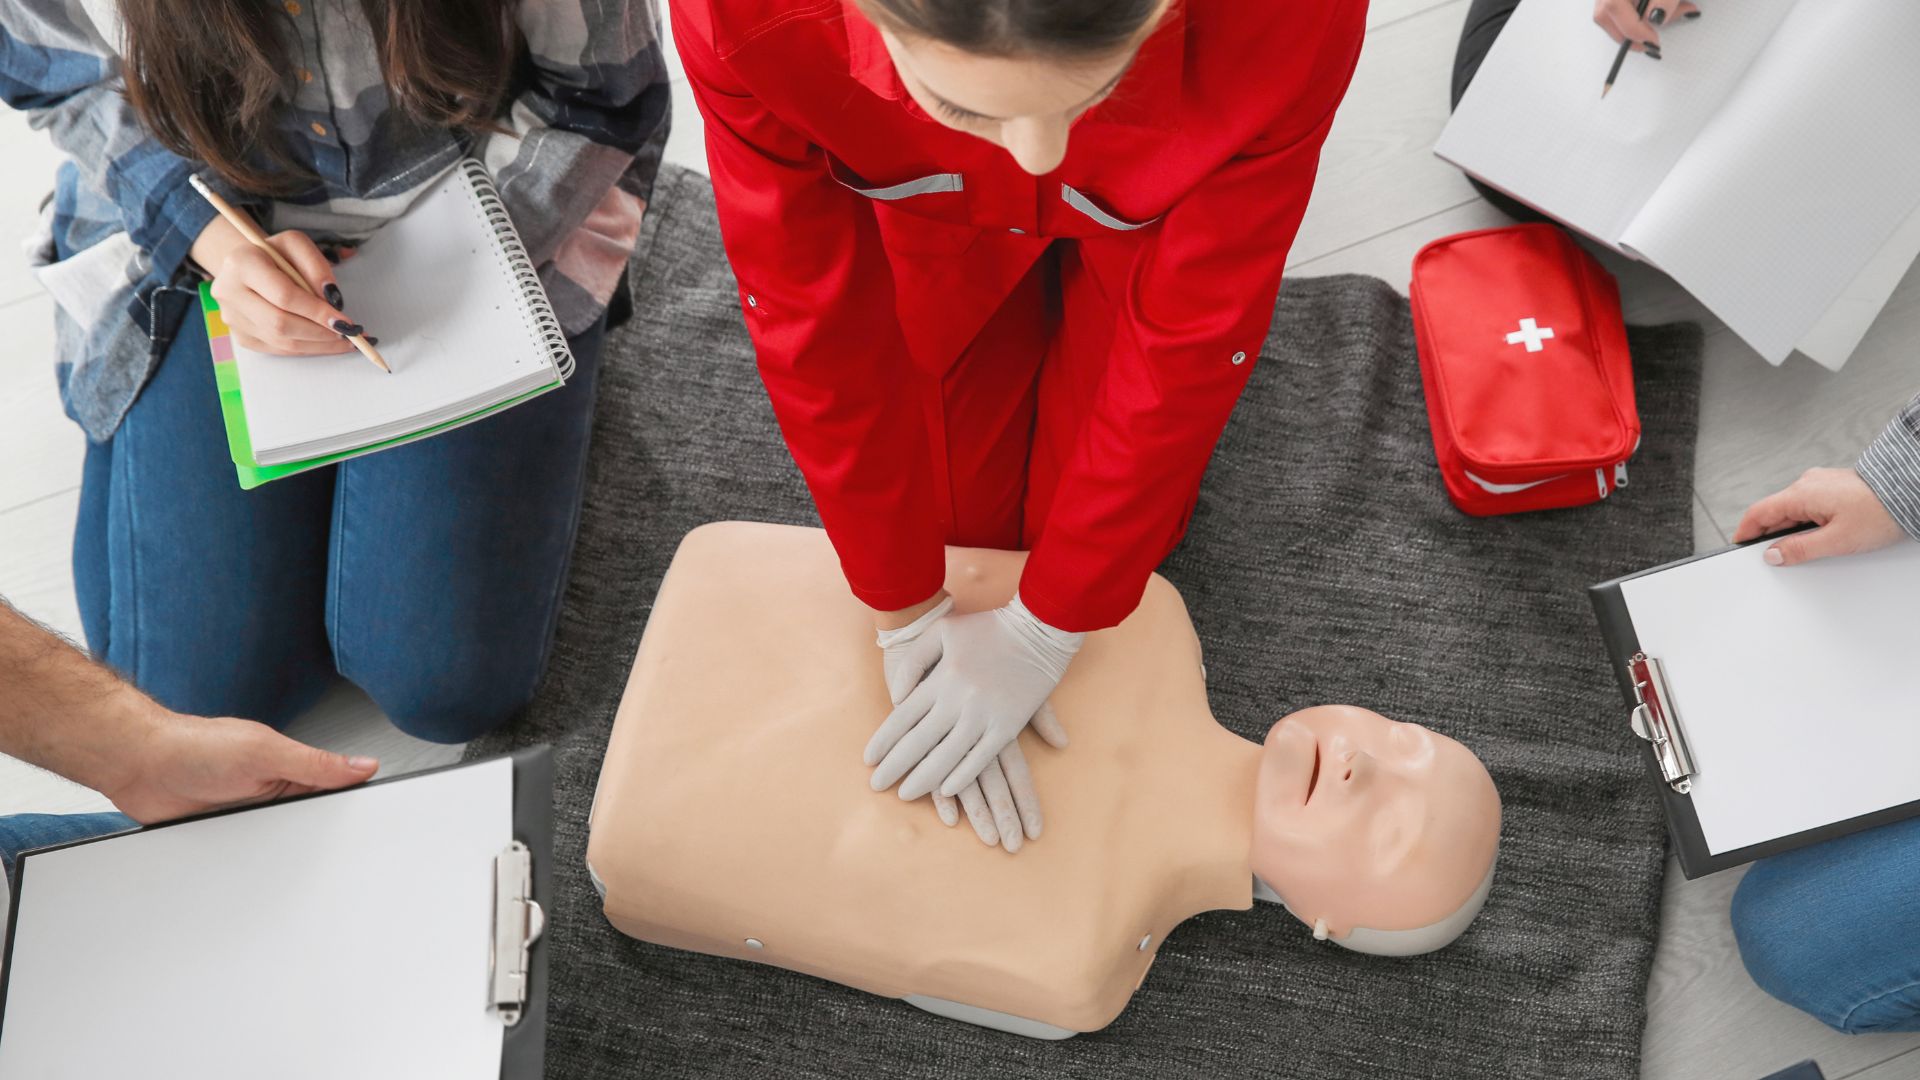 The ABCs of CPR: What You Need to Know About Cardiopulmonary Resuscitation